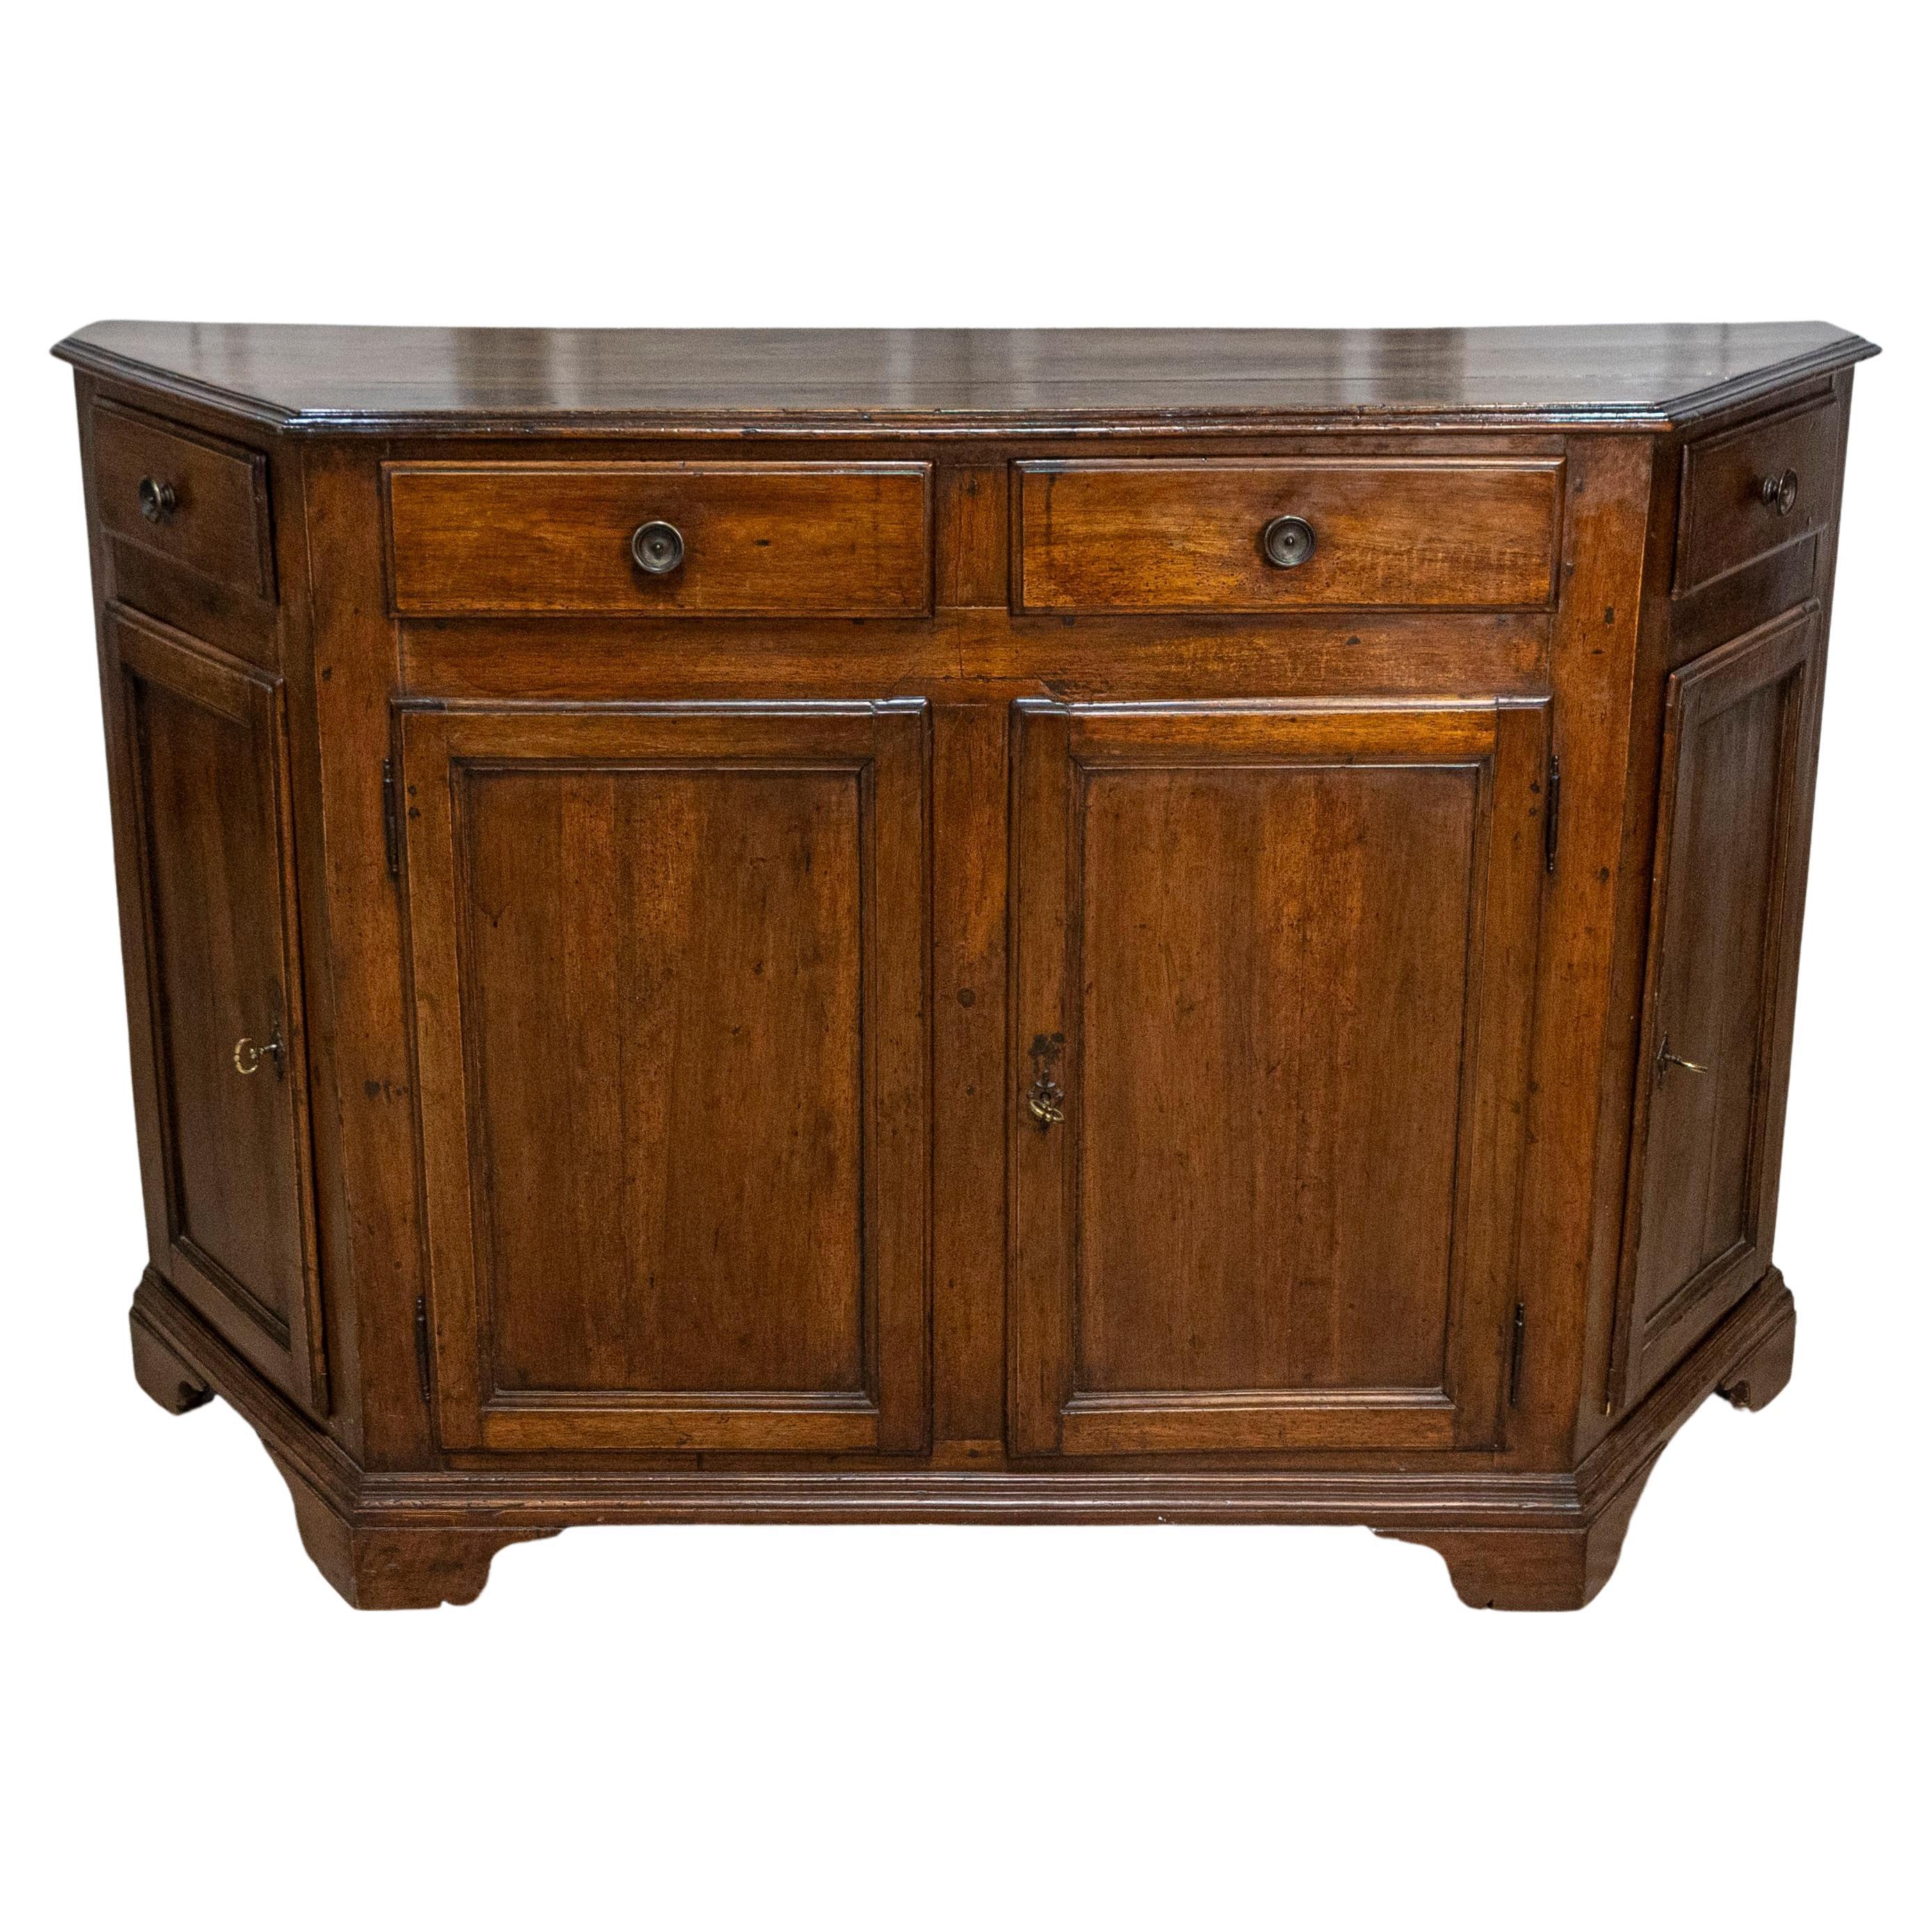  Venetian 19th Century Walnut Credenza with Canted Sides, Drawers and Doors For Sale